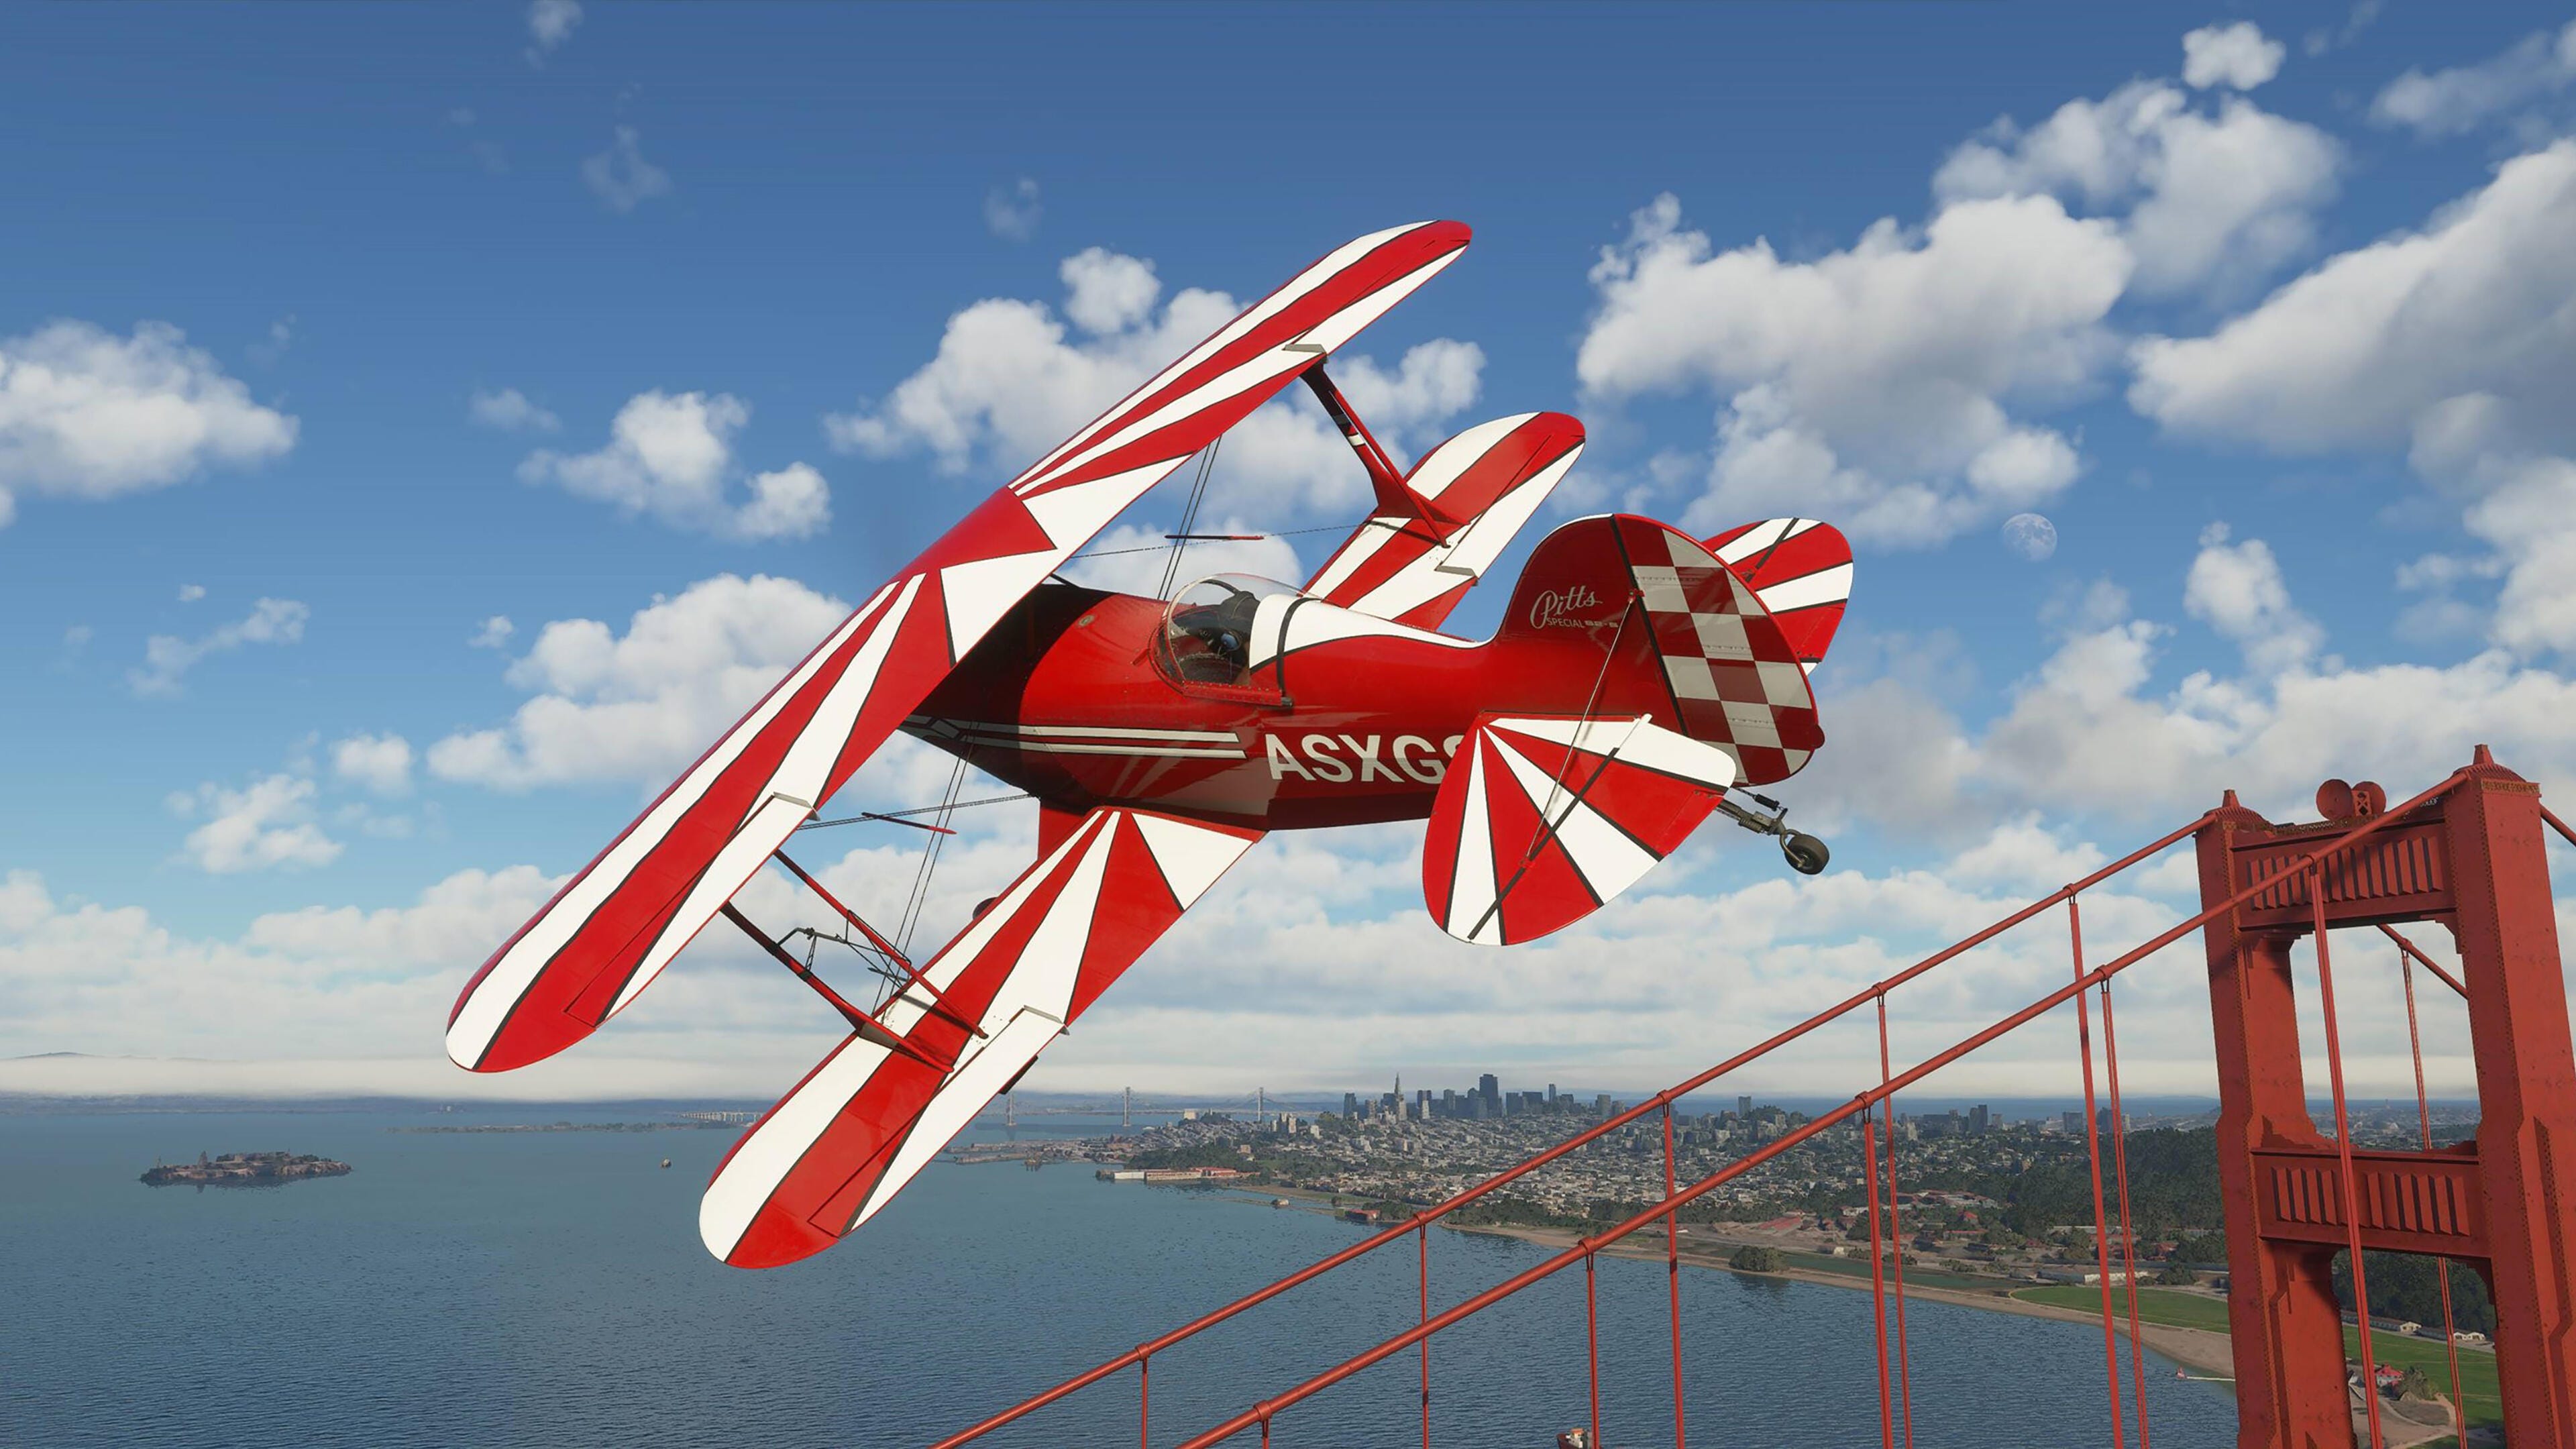 Microsoft Flight Simulator is coming to Steam. Here’s how to preorder